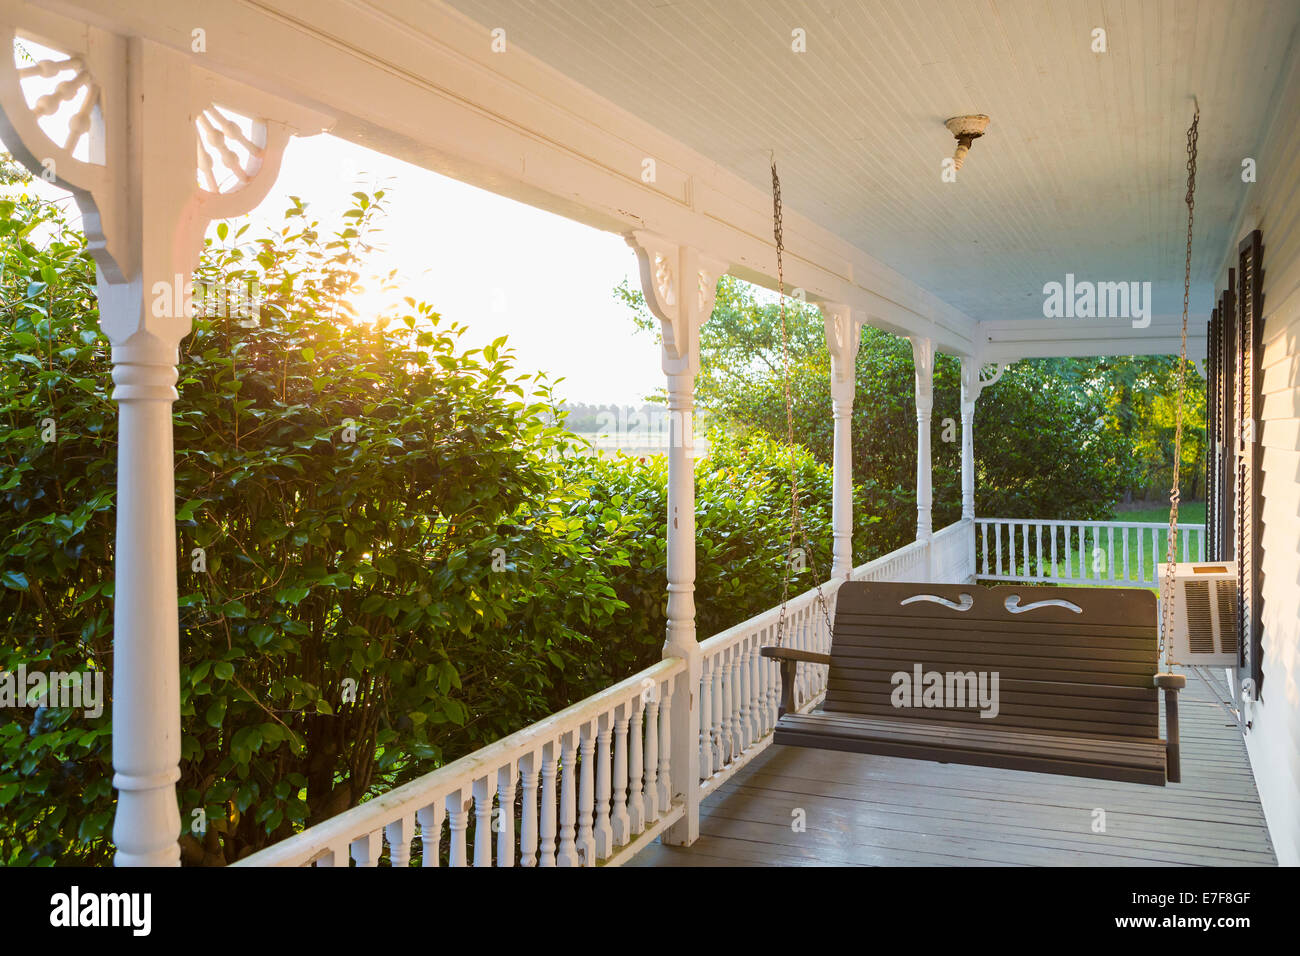 Swing on porch of traditional house Stock Photo